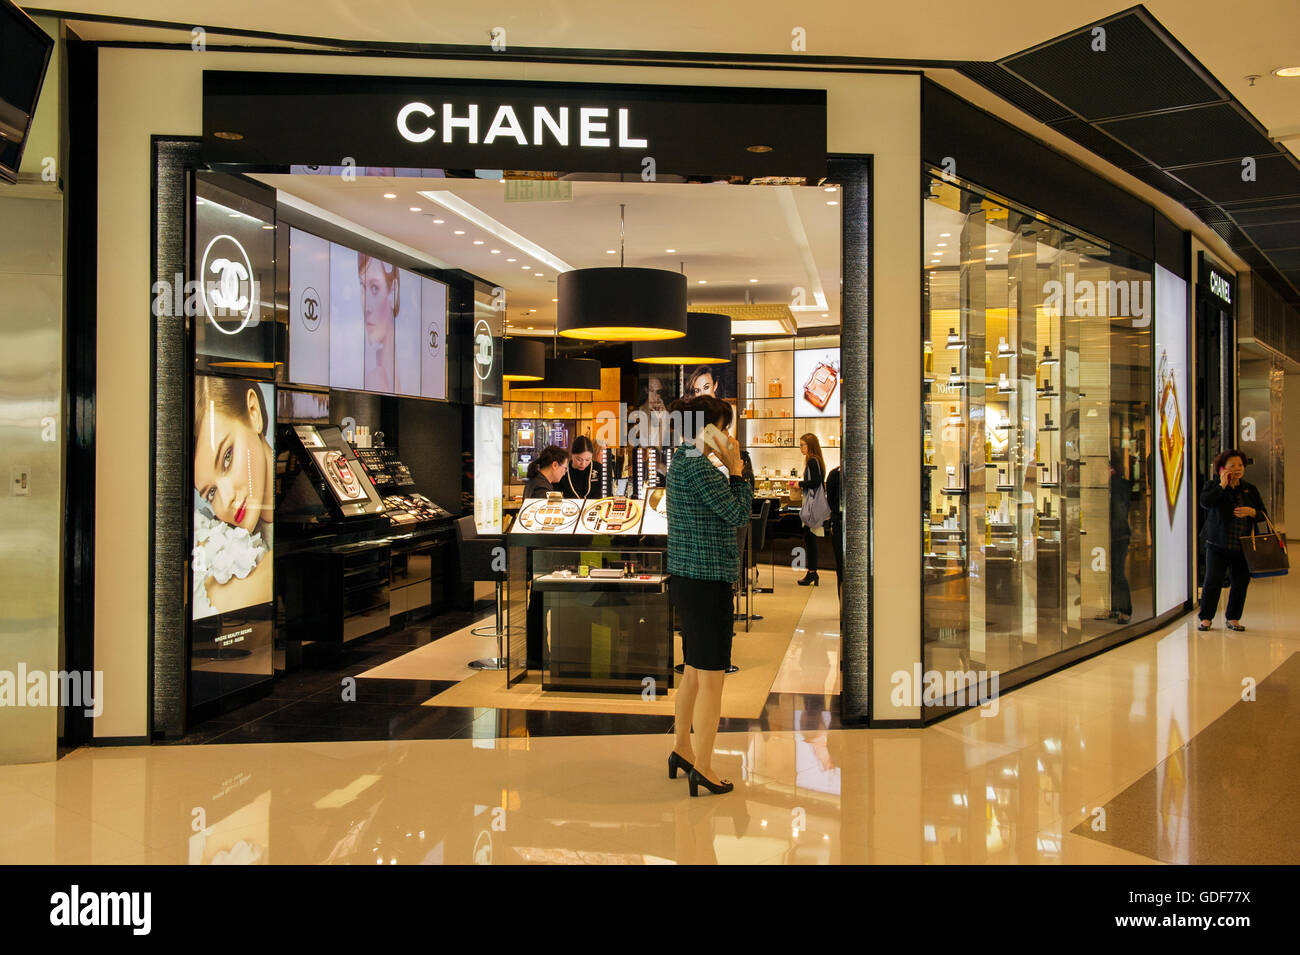 Bond Street to Your Street  offering handbags by brands such as Chanel  Prada and Louis Vuitton  opens at Ashfords McArthurGlen outlet centre